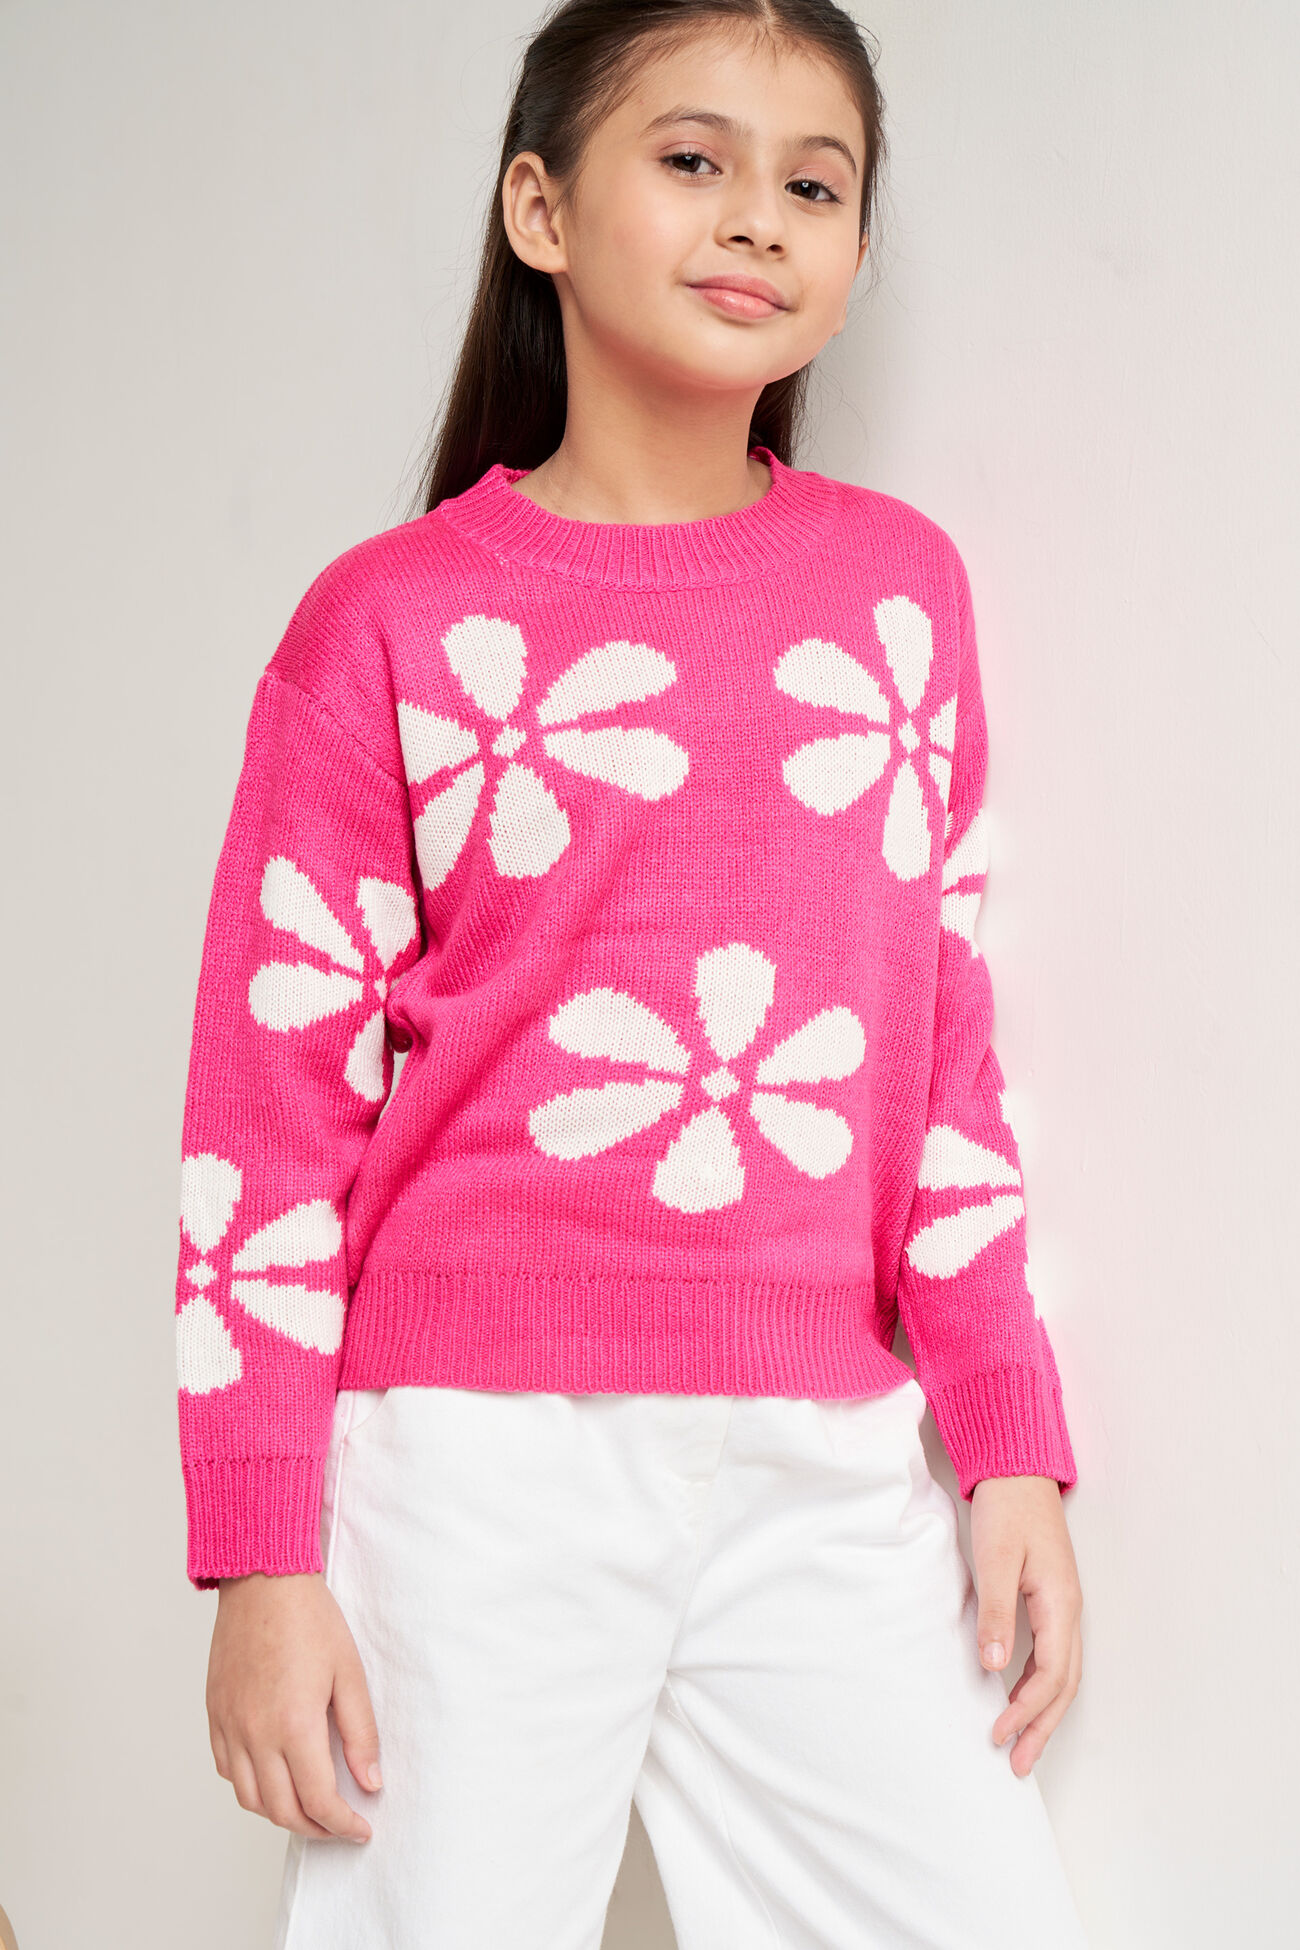 Pink Floral Straight Top, Pink, image 3